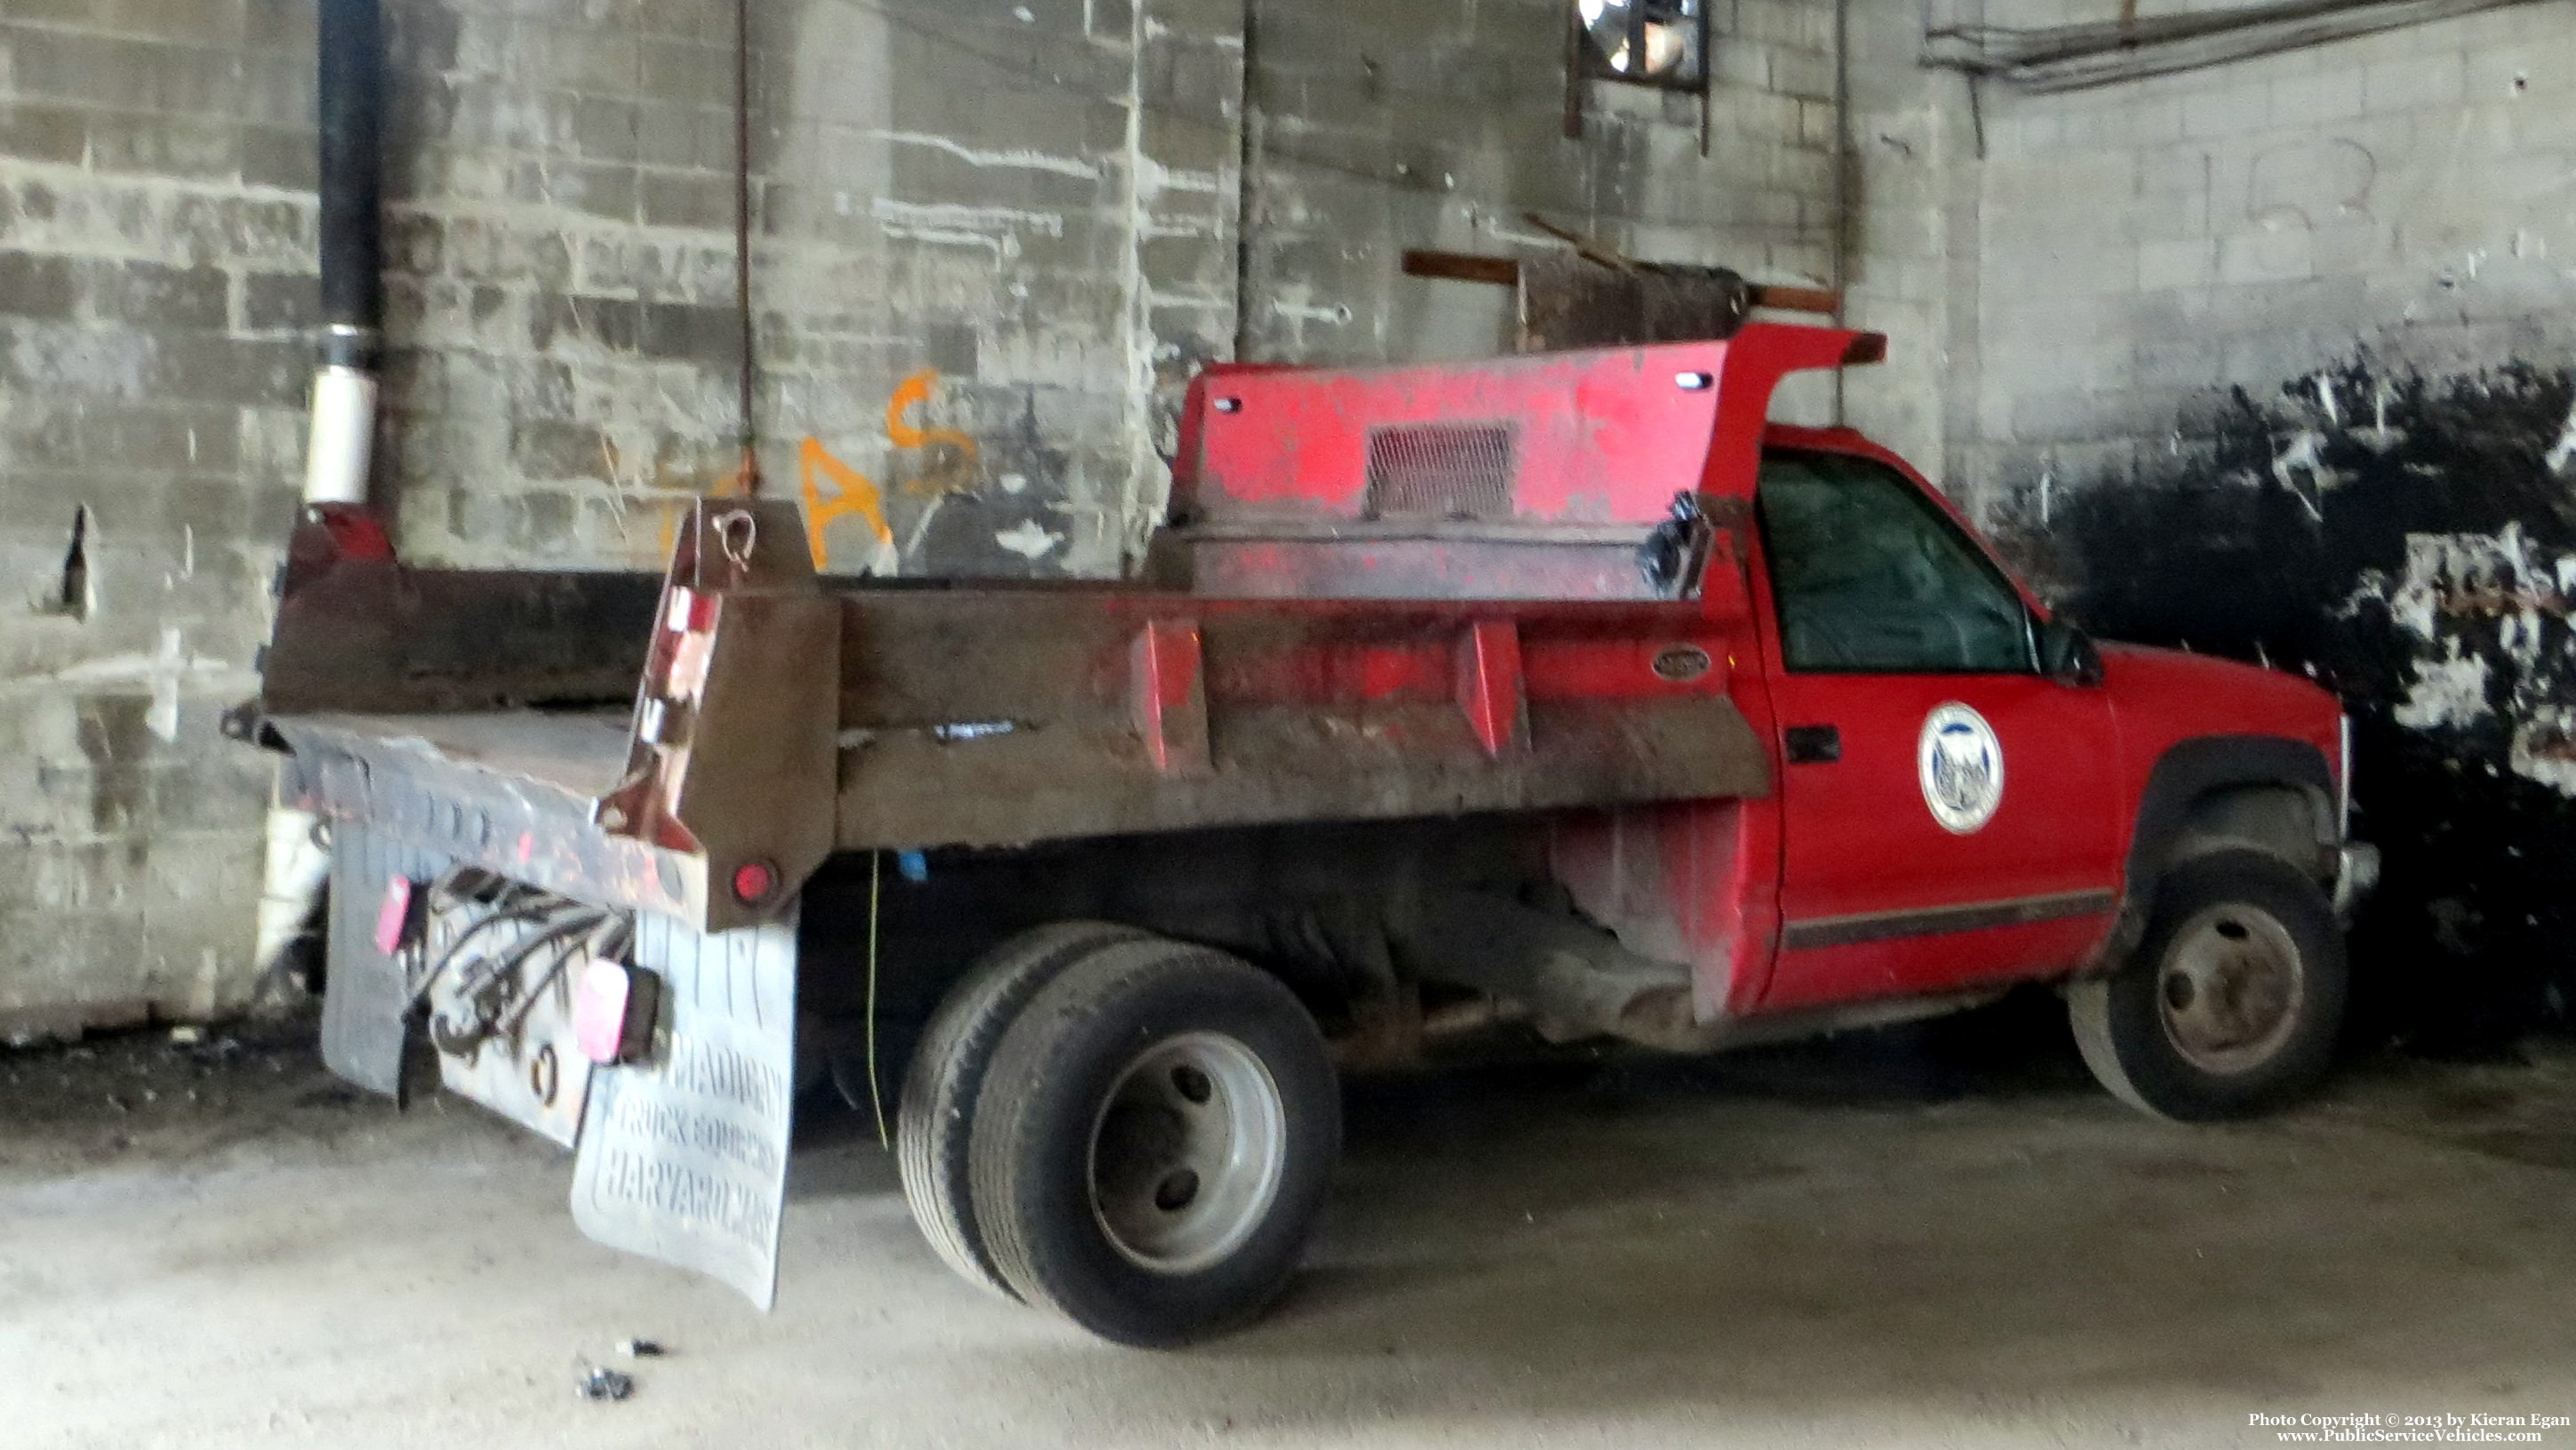 A photo  of Providence Highway Division
            Truck 123, a 1988-1998 Chevrolet             taken by Kieran Egan